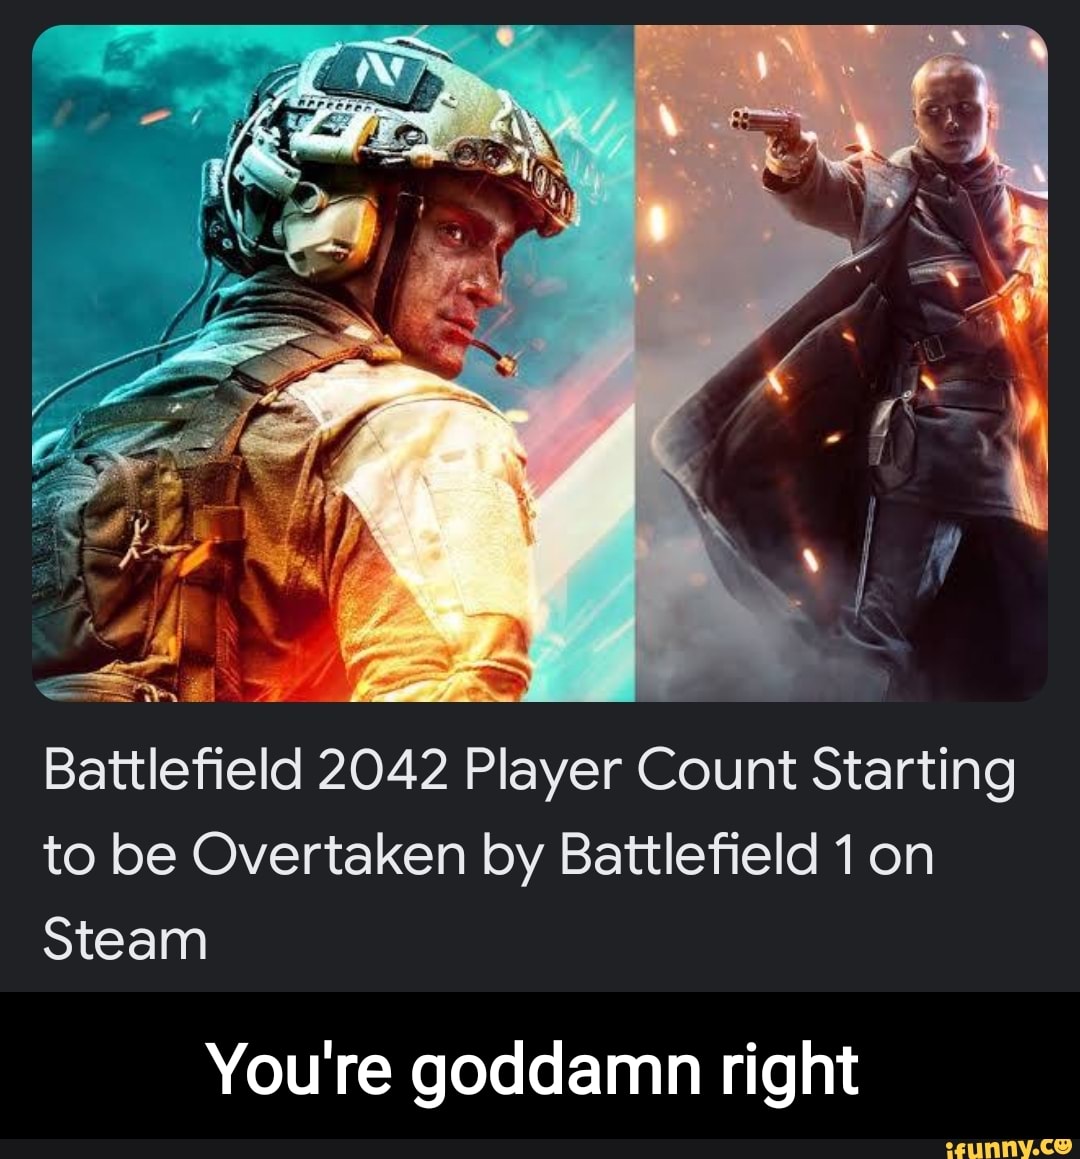 Battlefield 2042 Player Count Starting to be Overtaken by Battlefield 1